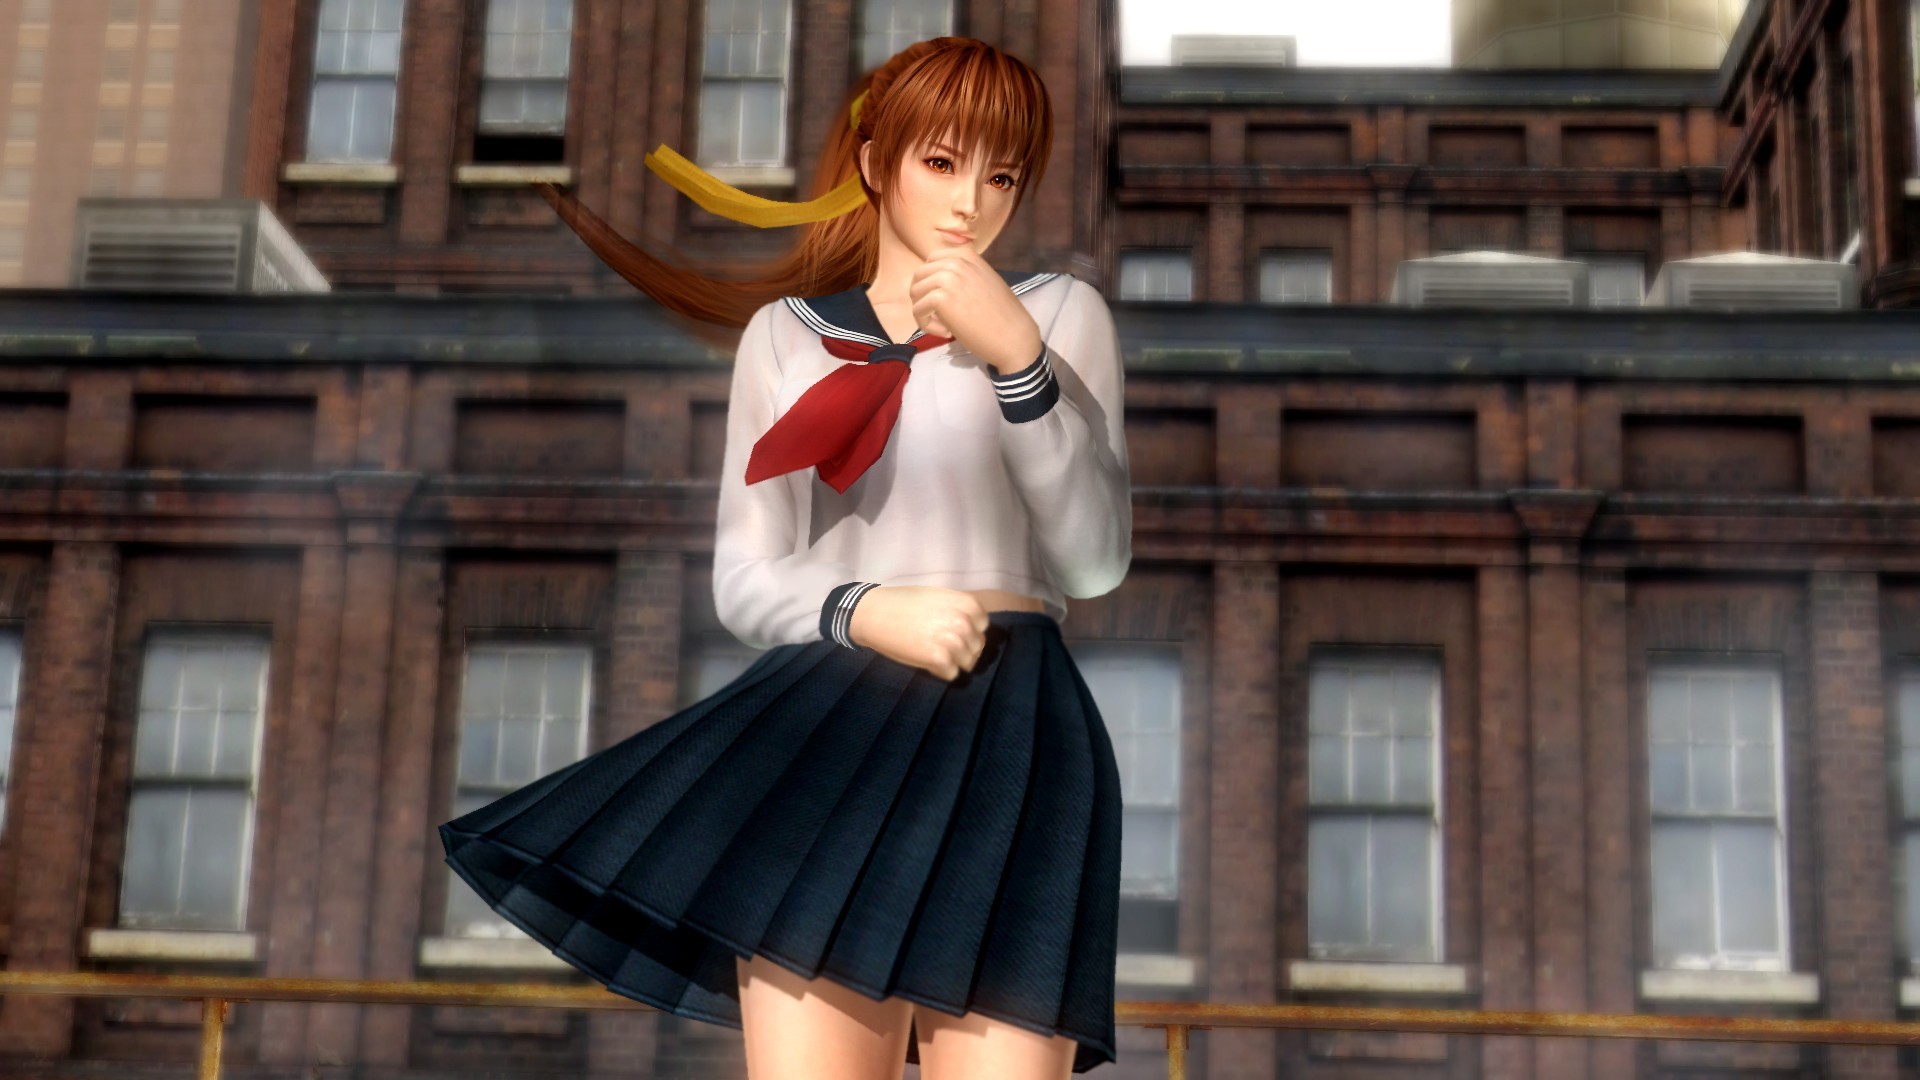 Anime 1920x1080 video games school uniform Dead or Alive 5 video game girls video game warriors women video game characters